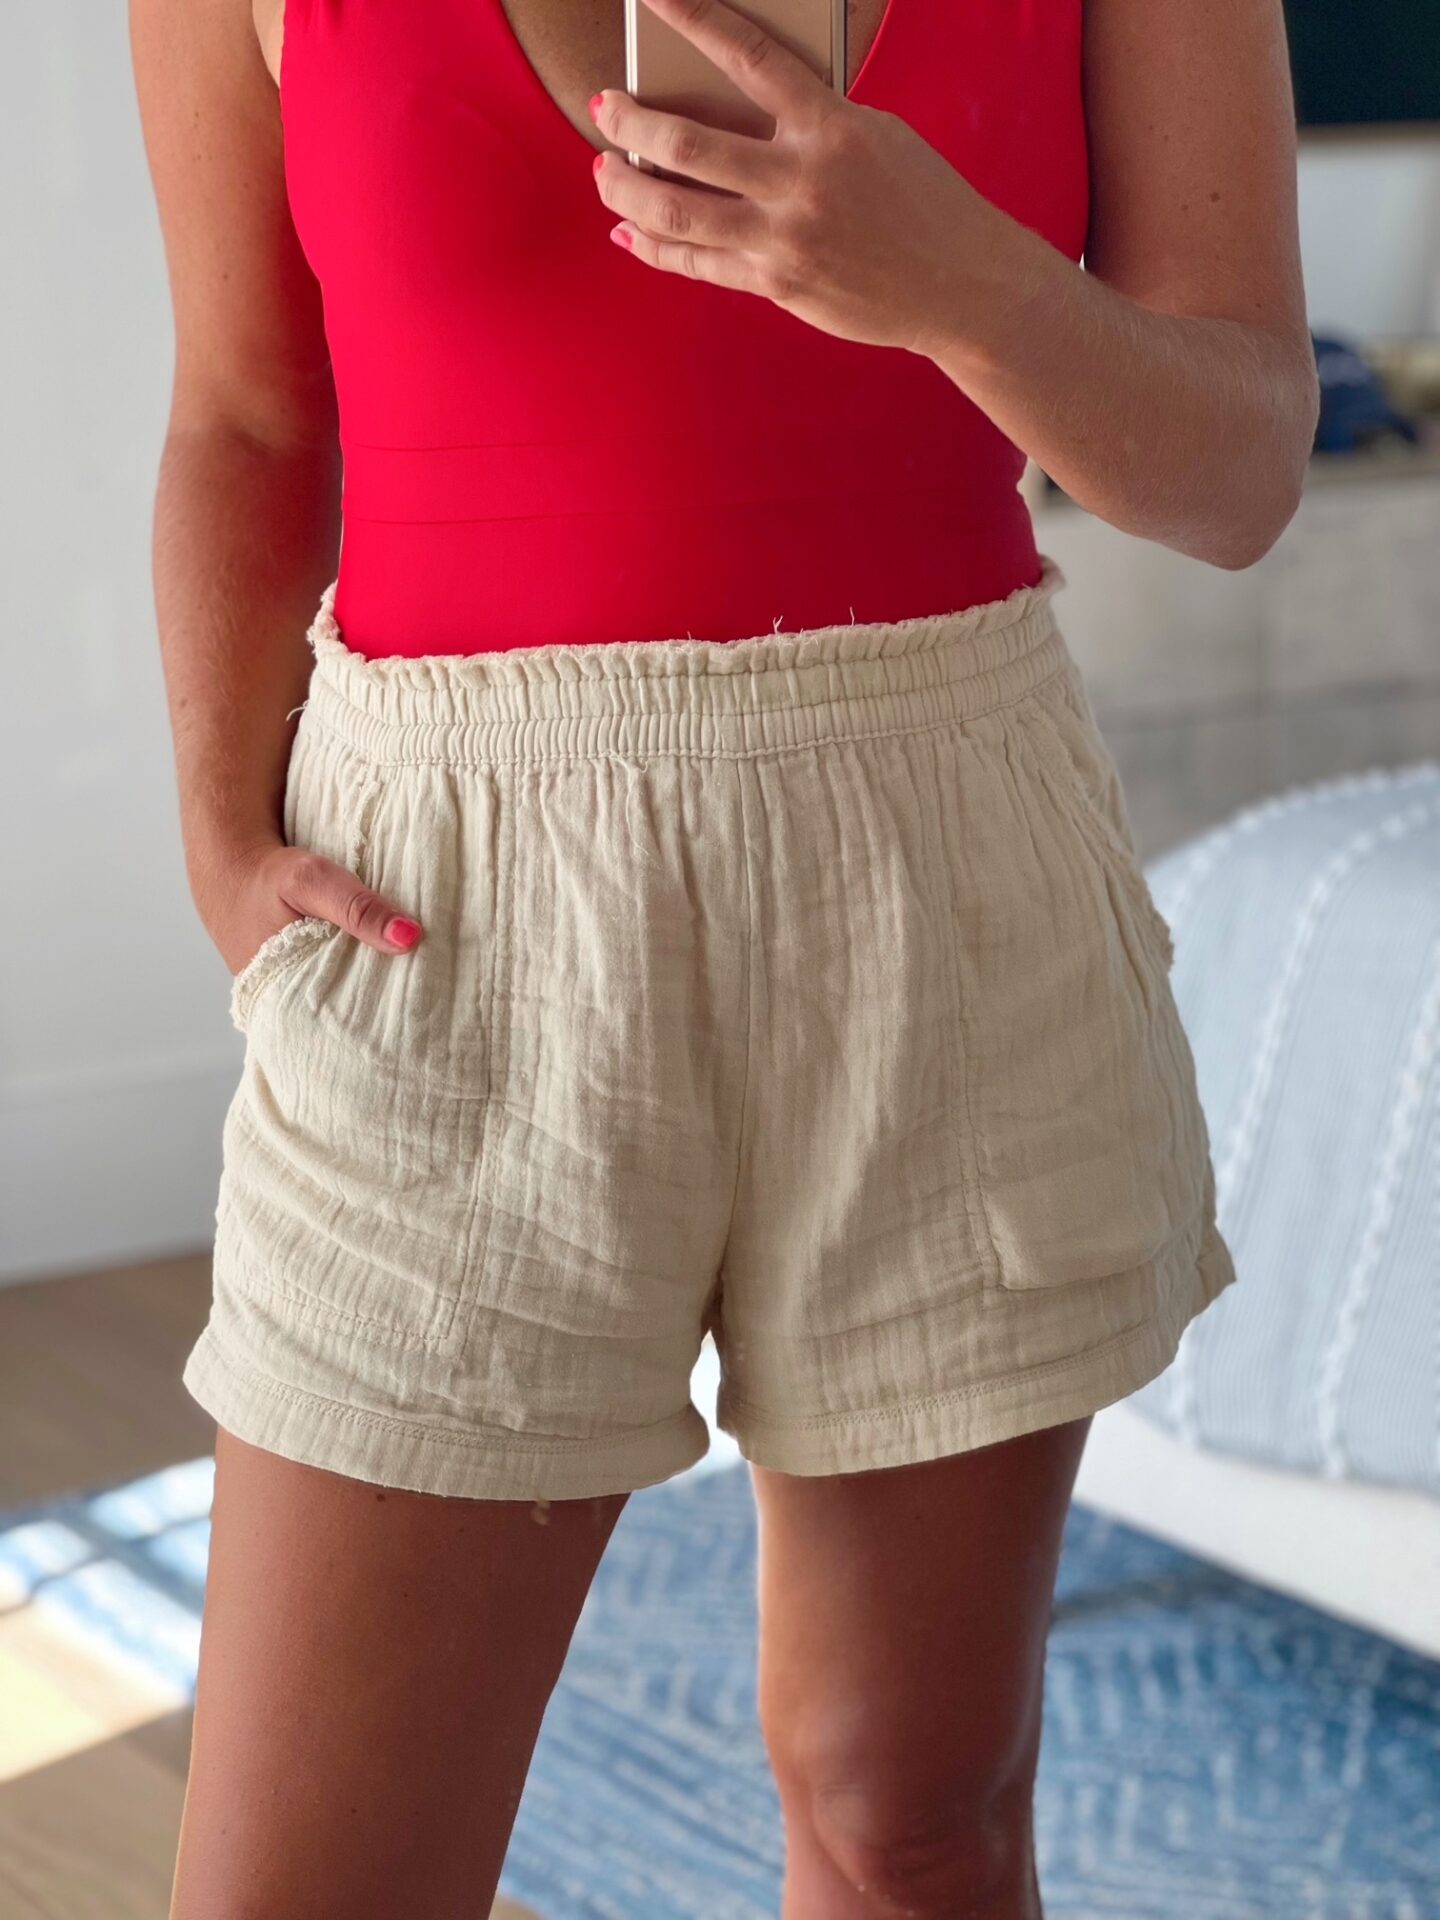 The Aerie Shorts Styled 5 Ways - Living in Yellow